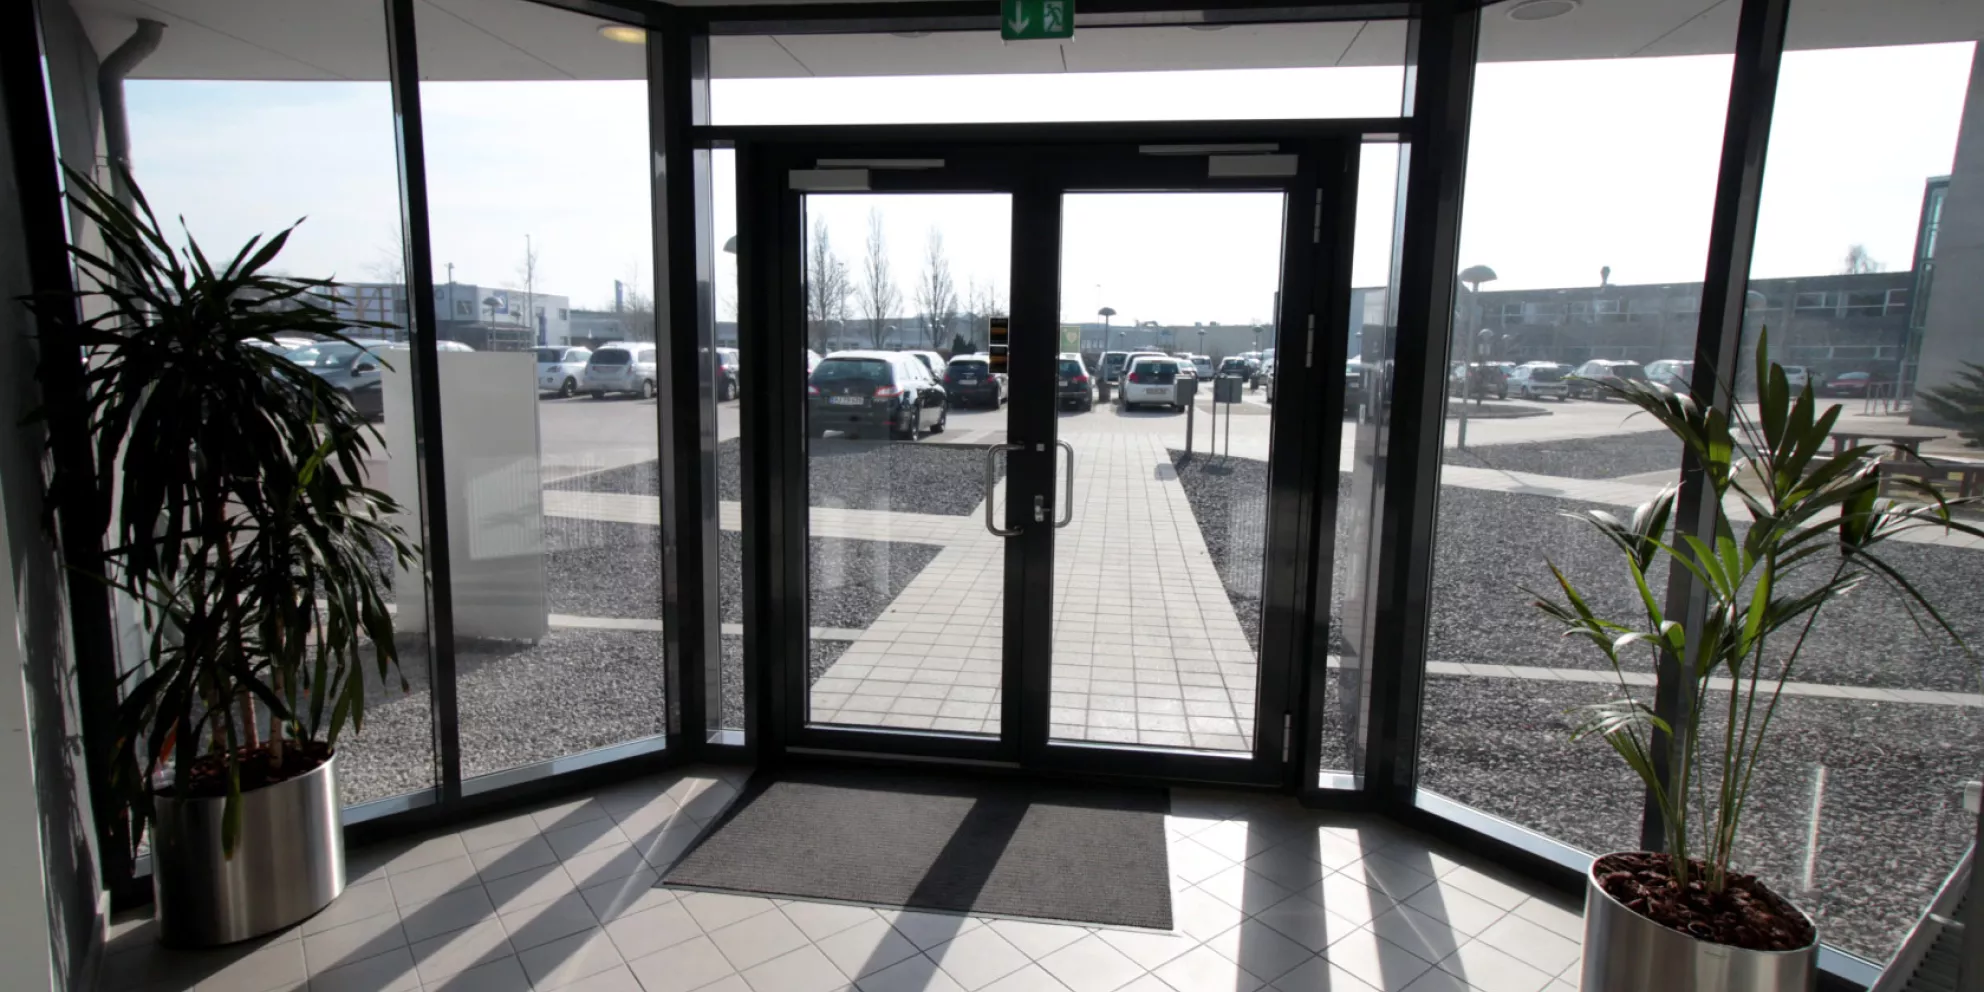 View of parking lot through lobby doors